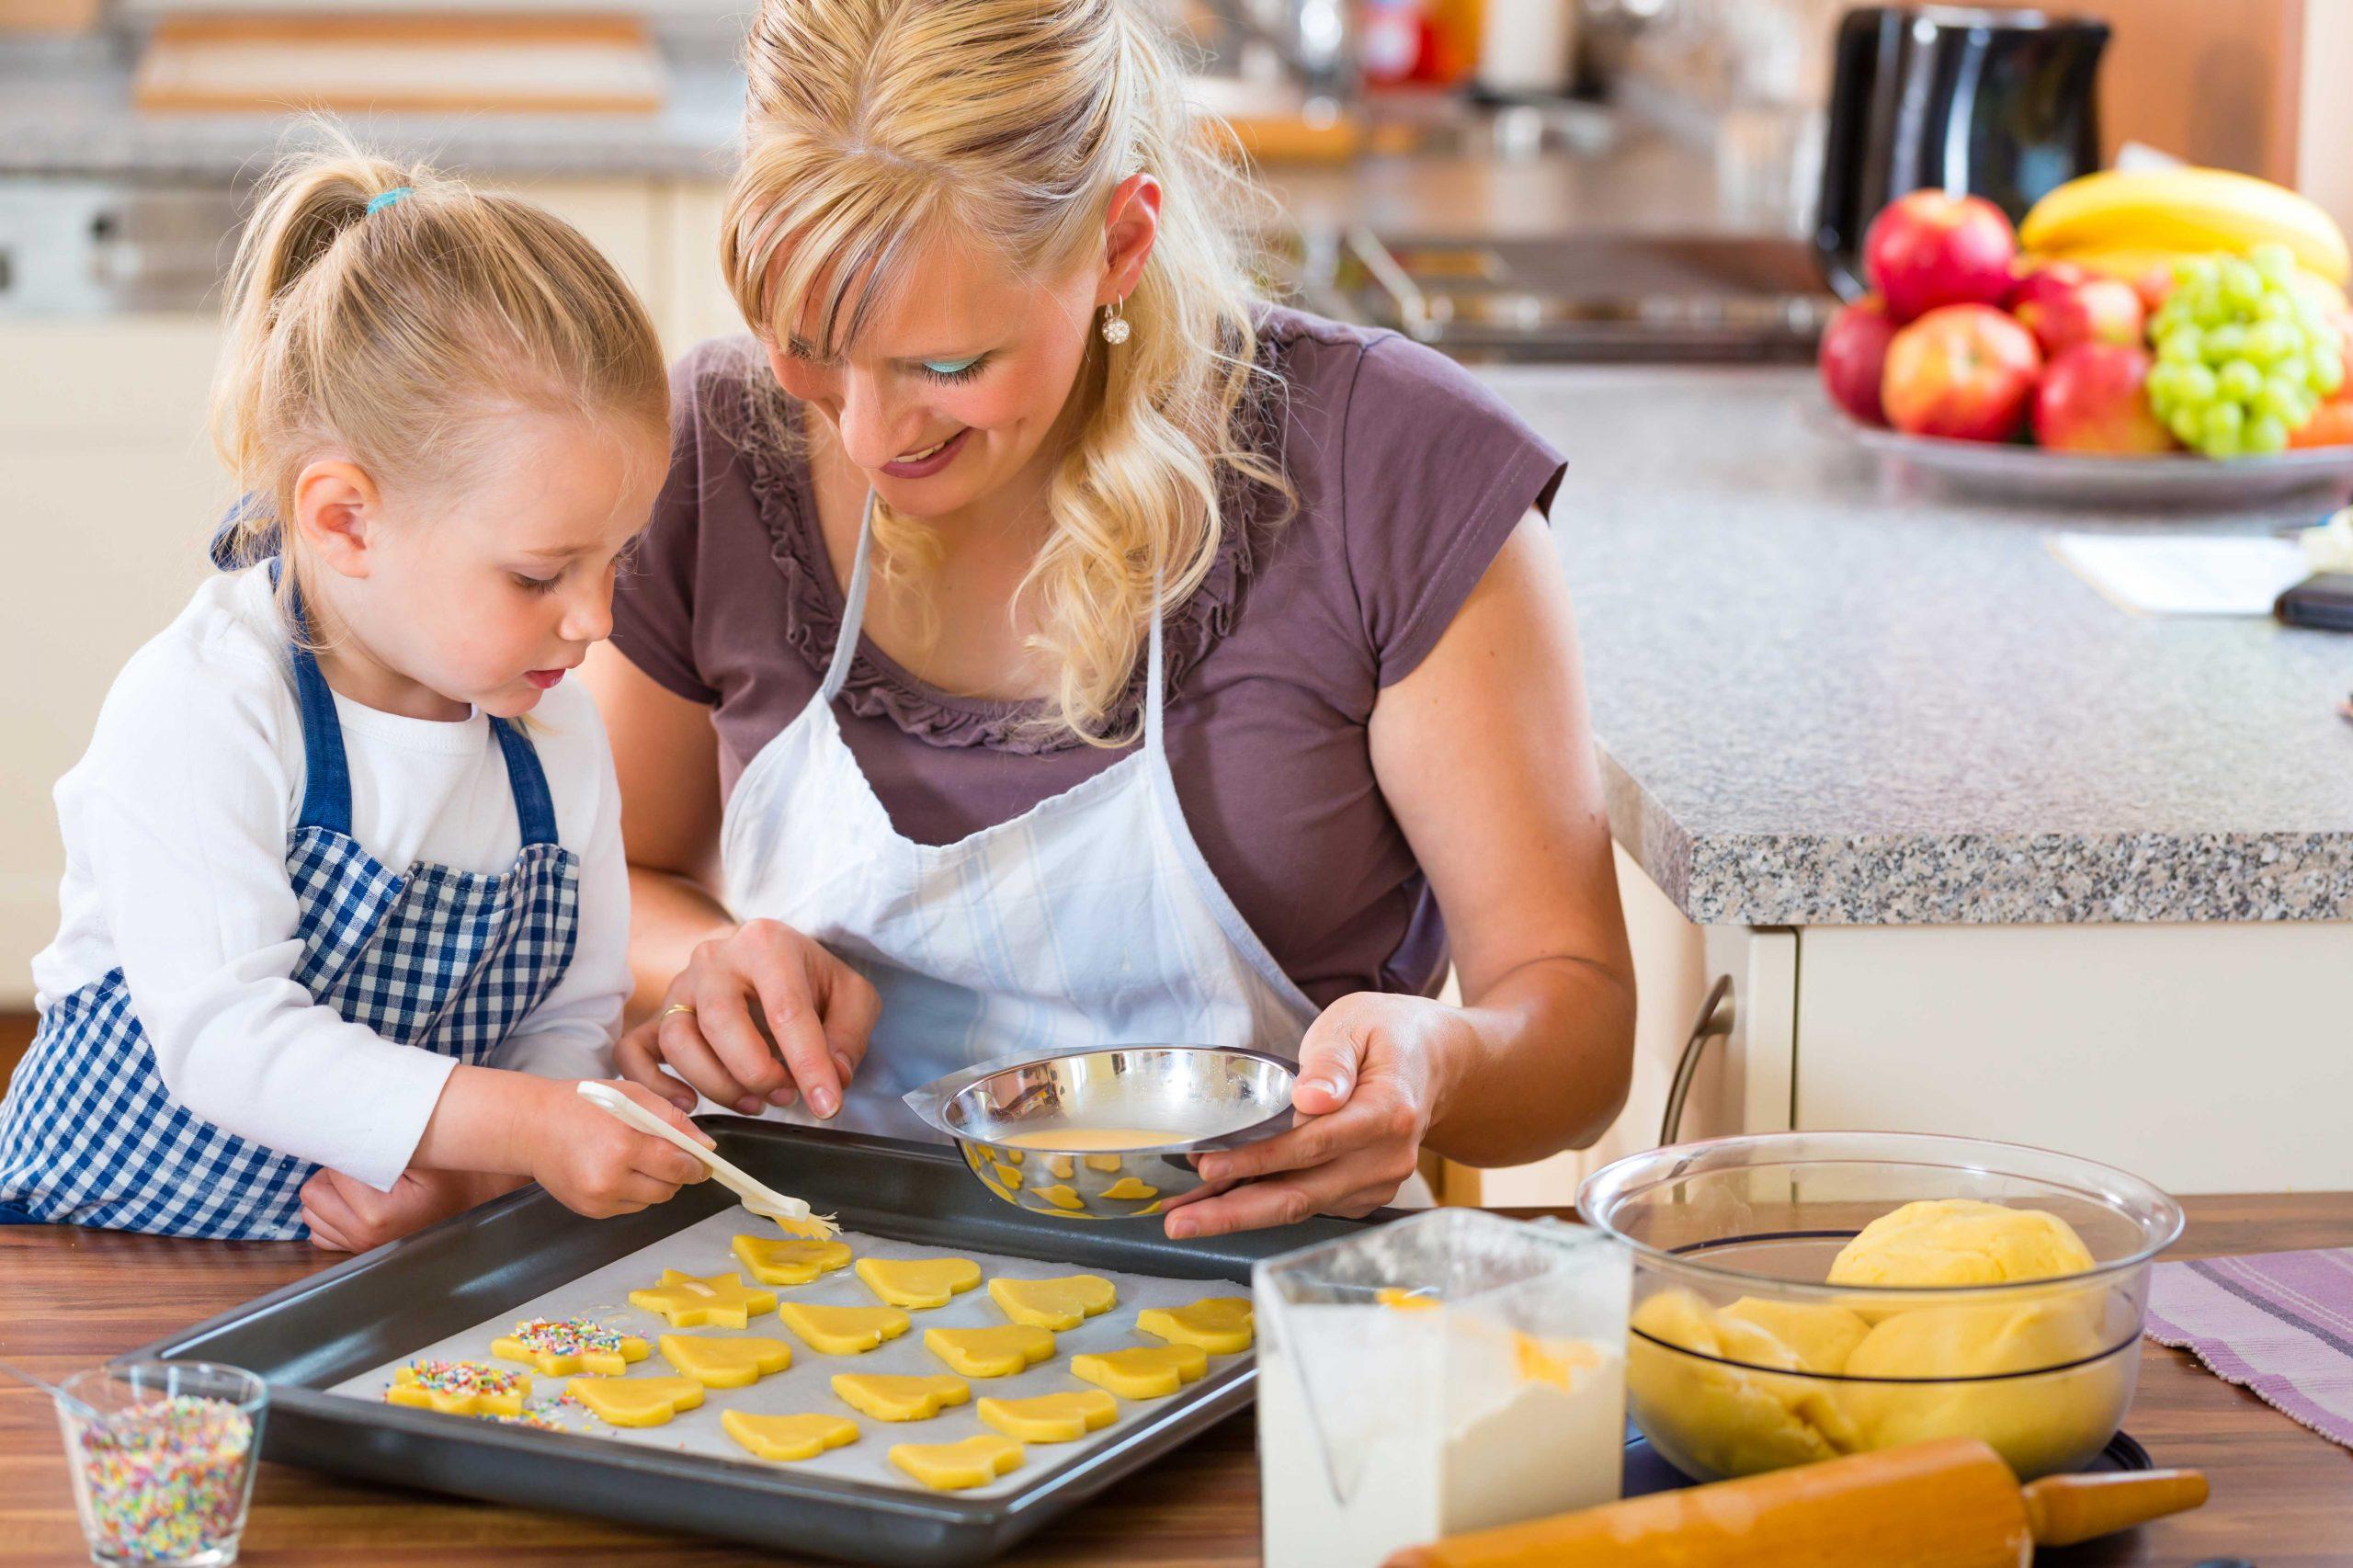 Find out why all parents should be teaching their kids to cook. And, if you're not a great cook yourself or don't have a lot of extra time, find out why you should take Cooking Classes With Your Kids which helps you foster stronger bonds with your kids, teaches life-skills, and helps kids develop a healthy relationship with food.